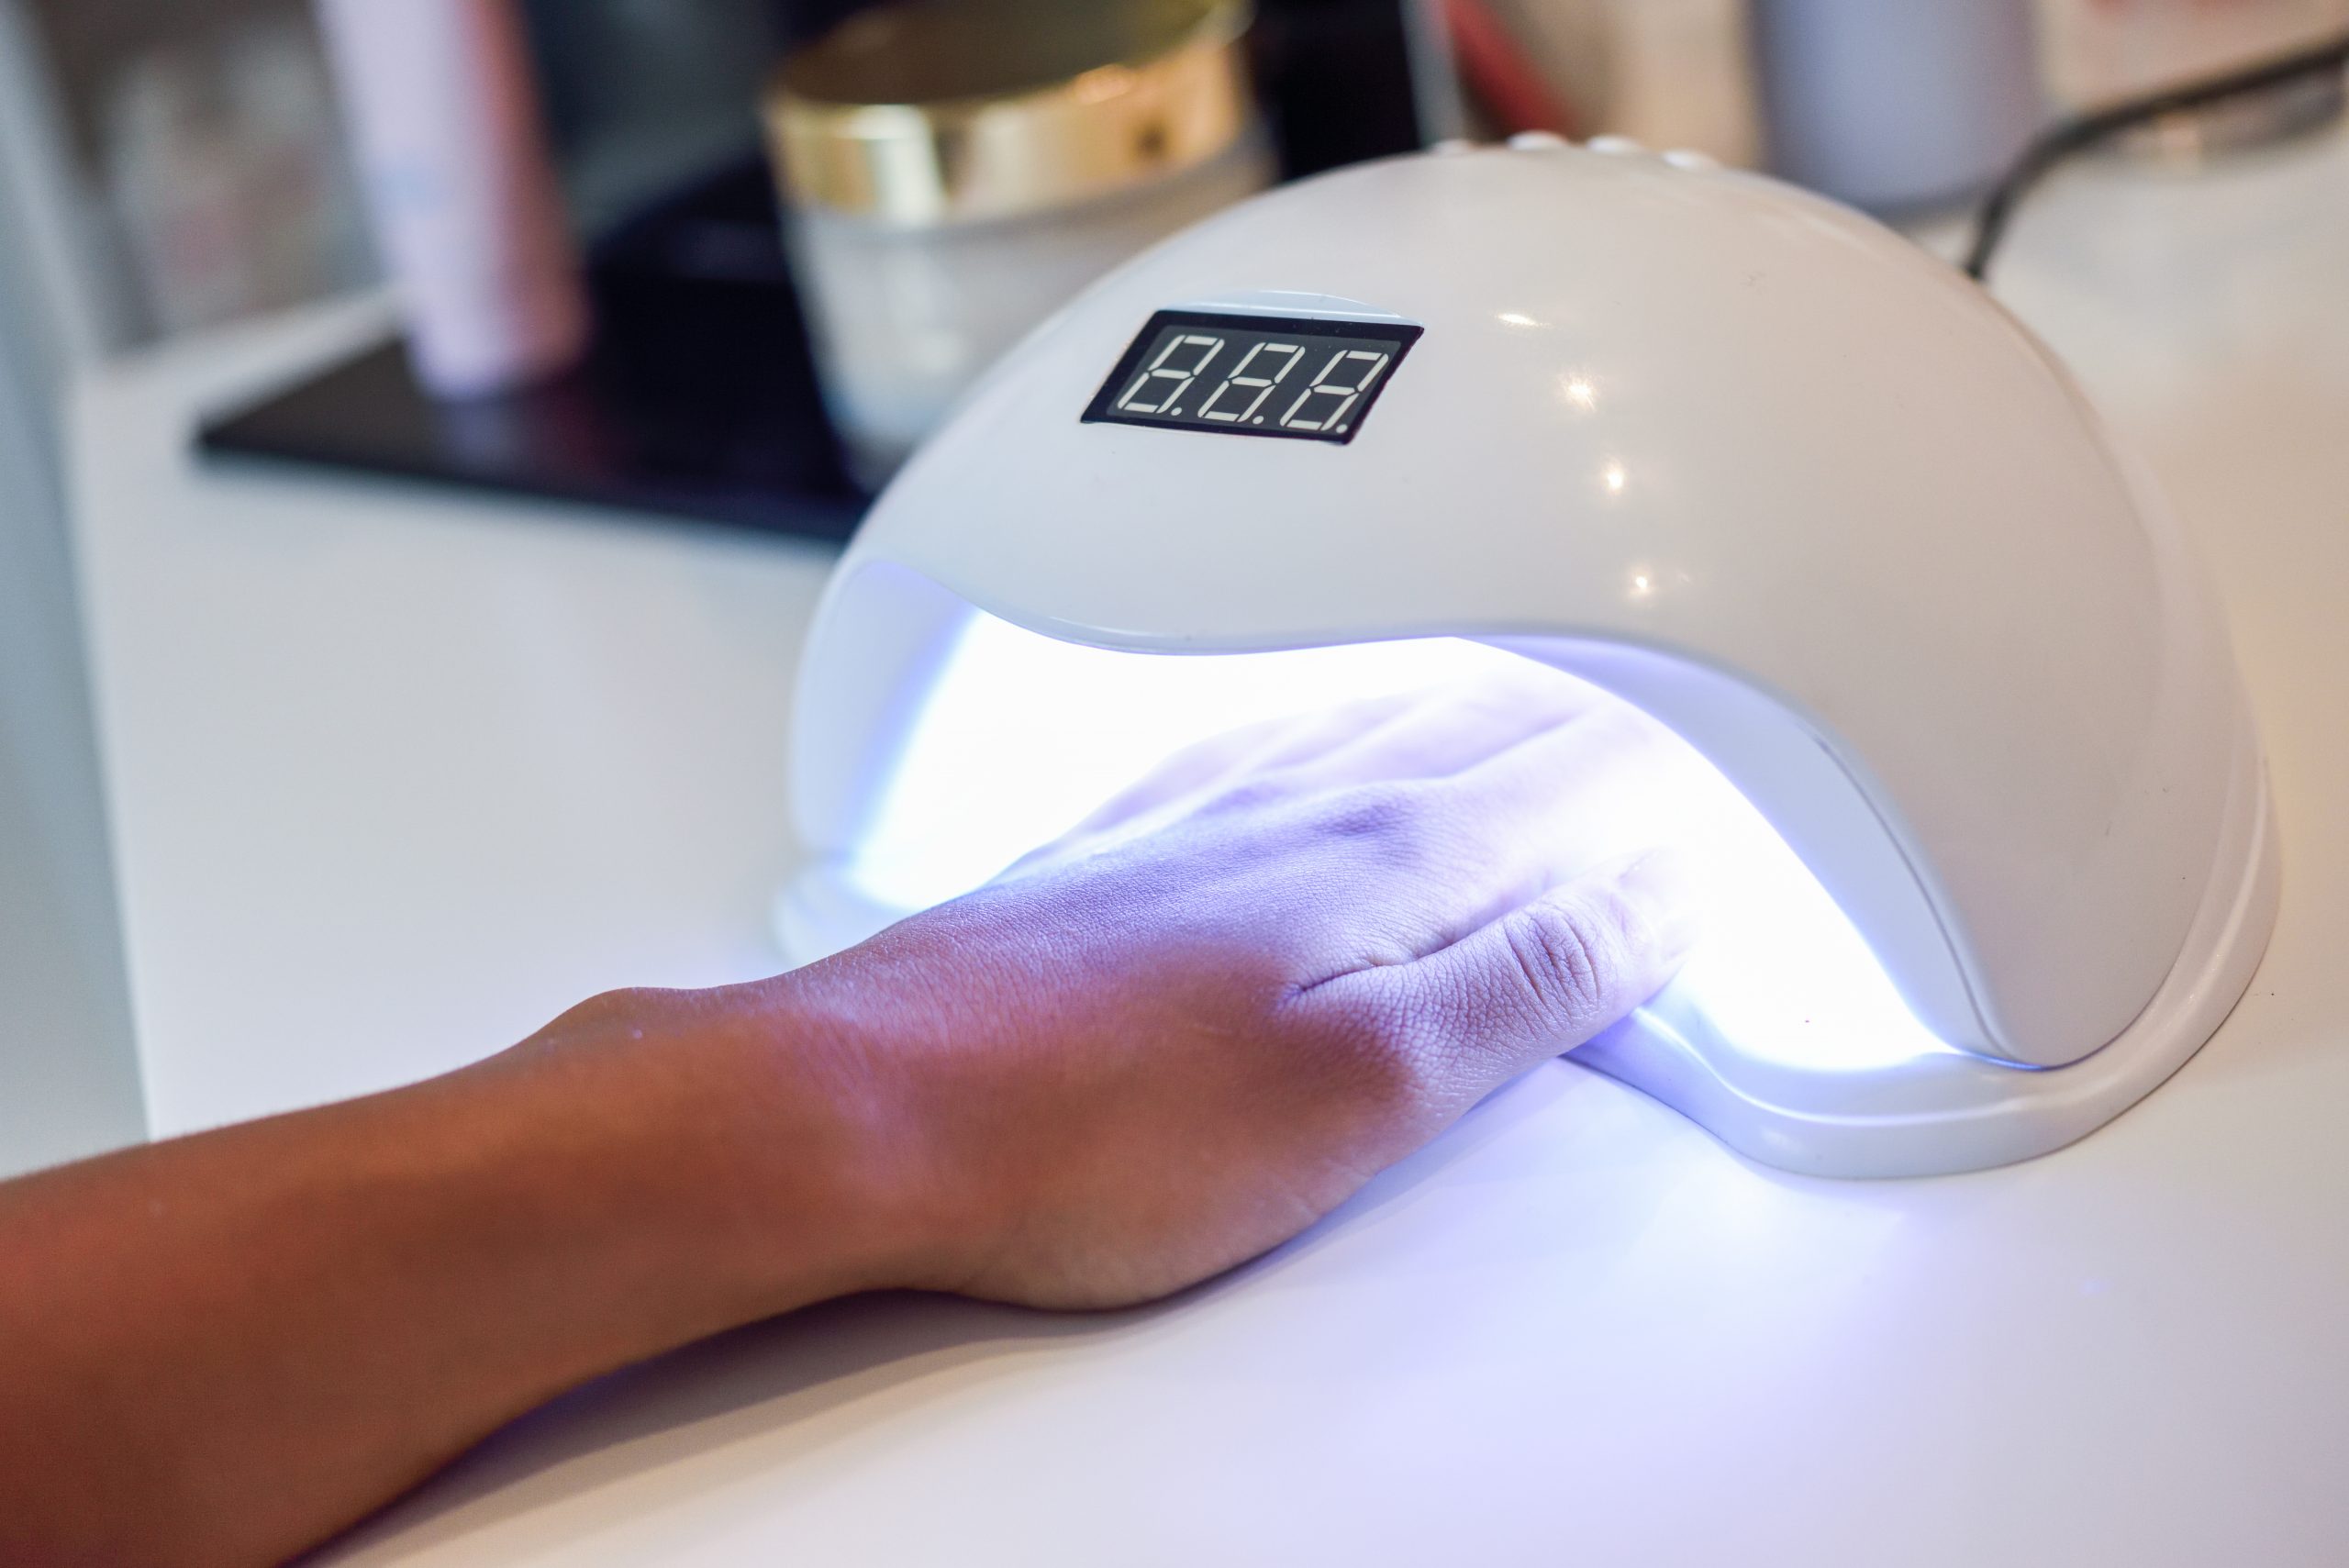 Dry Nails Faster Than Ever With The Nail Polish UV Light | Reviews, Ratings, Comparisons